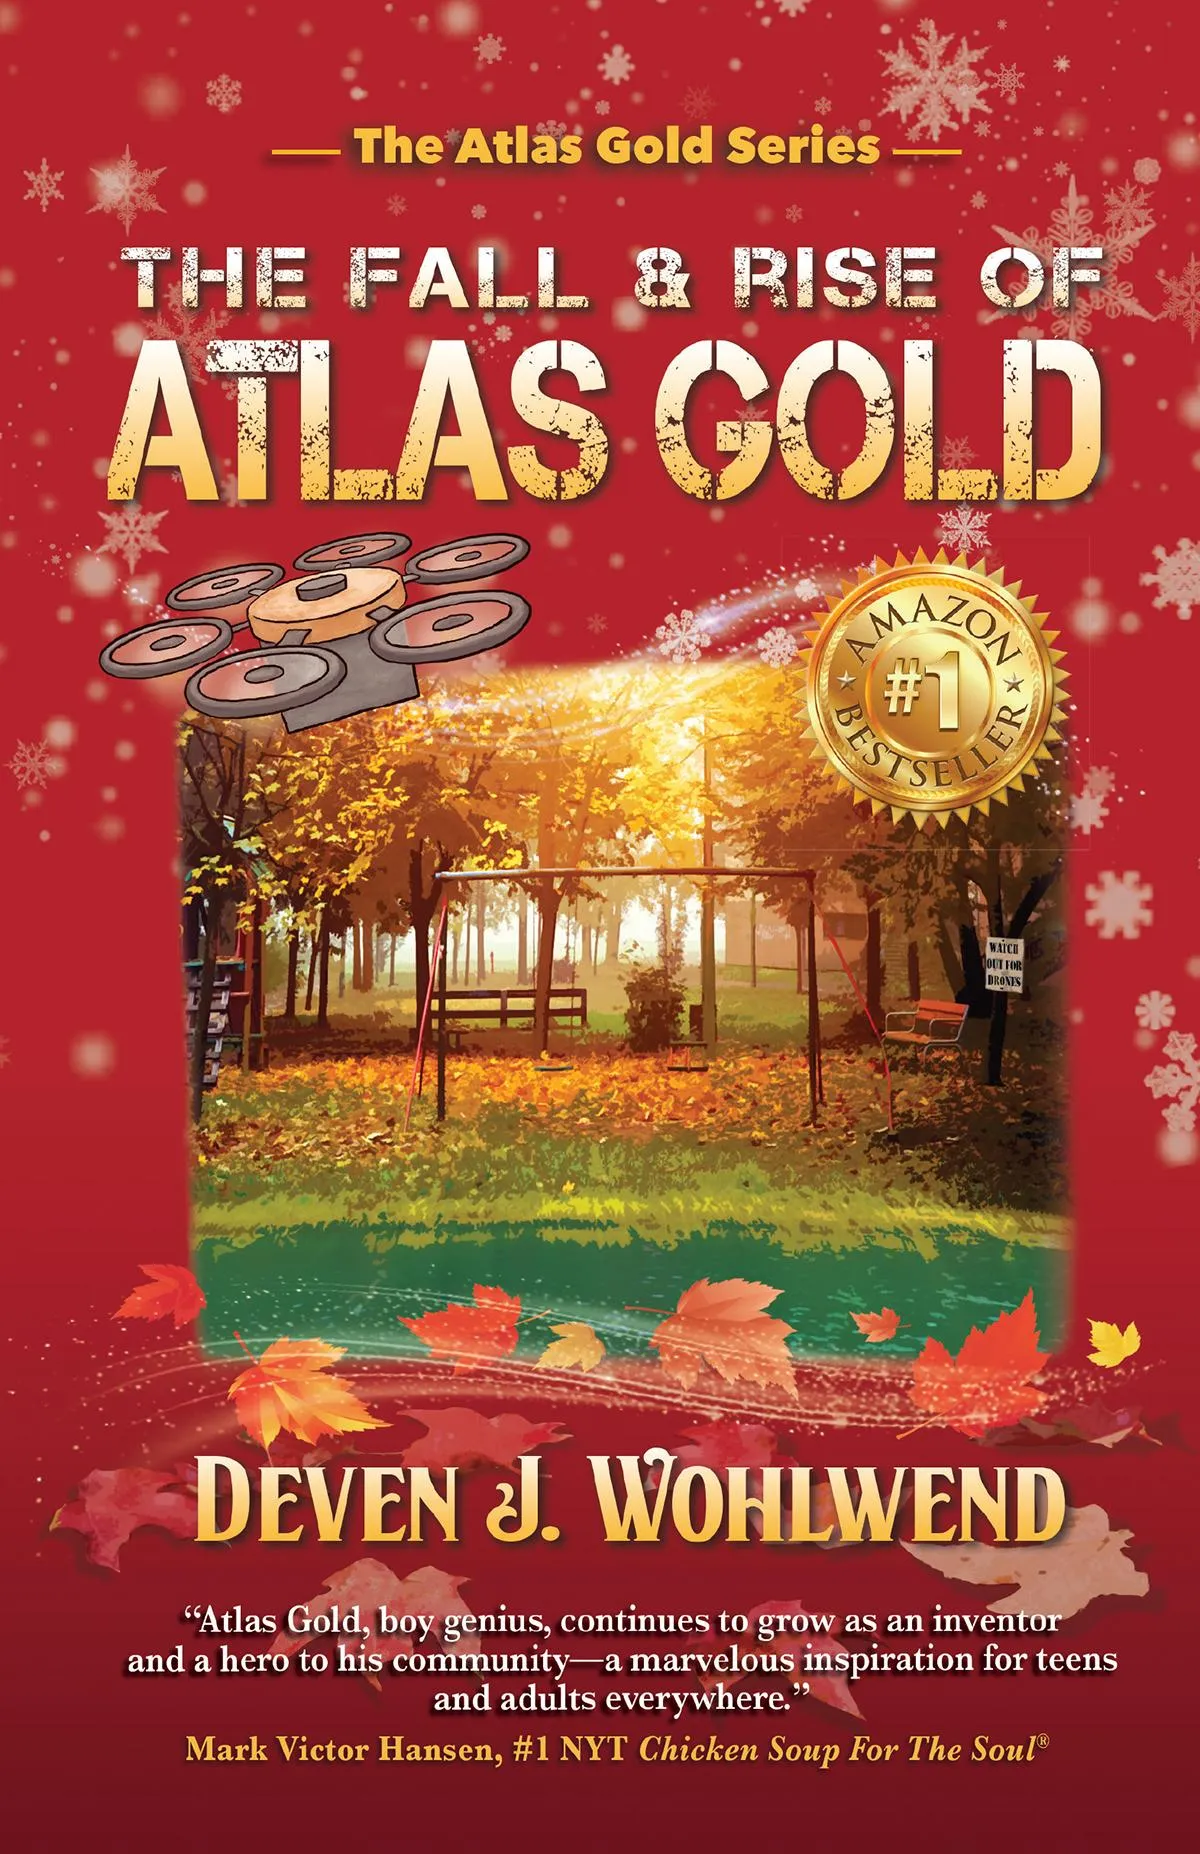 The Fall and Rise of Atlas Gold by Deven J.Wohlwend